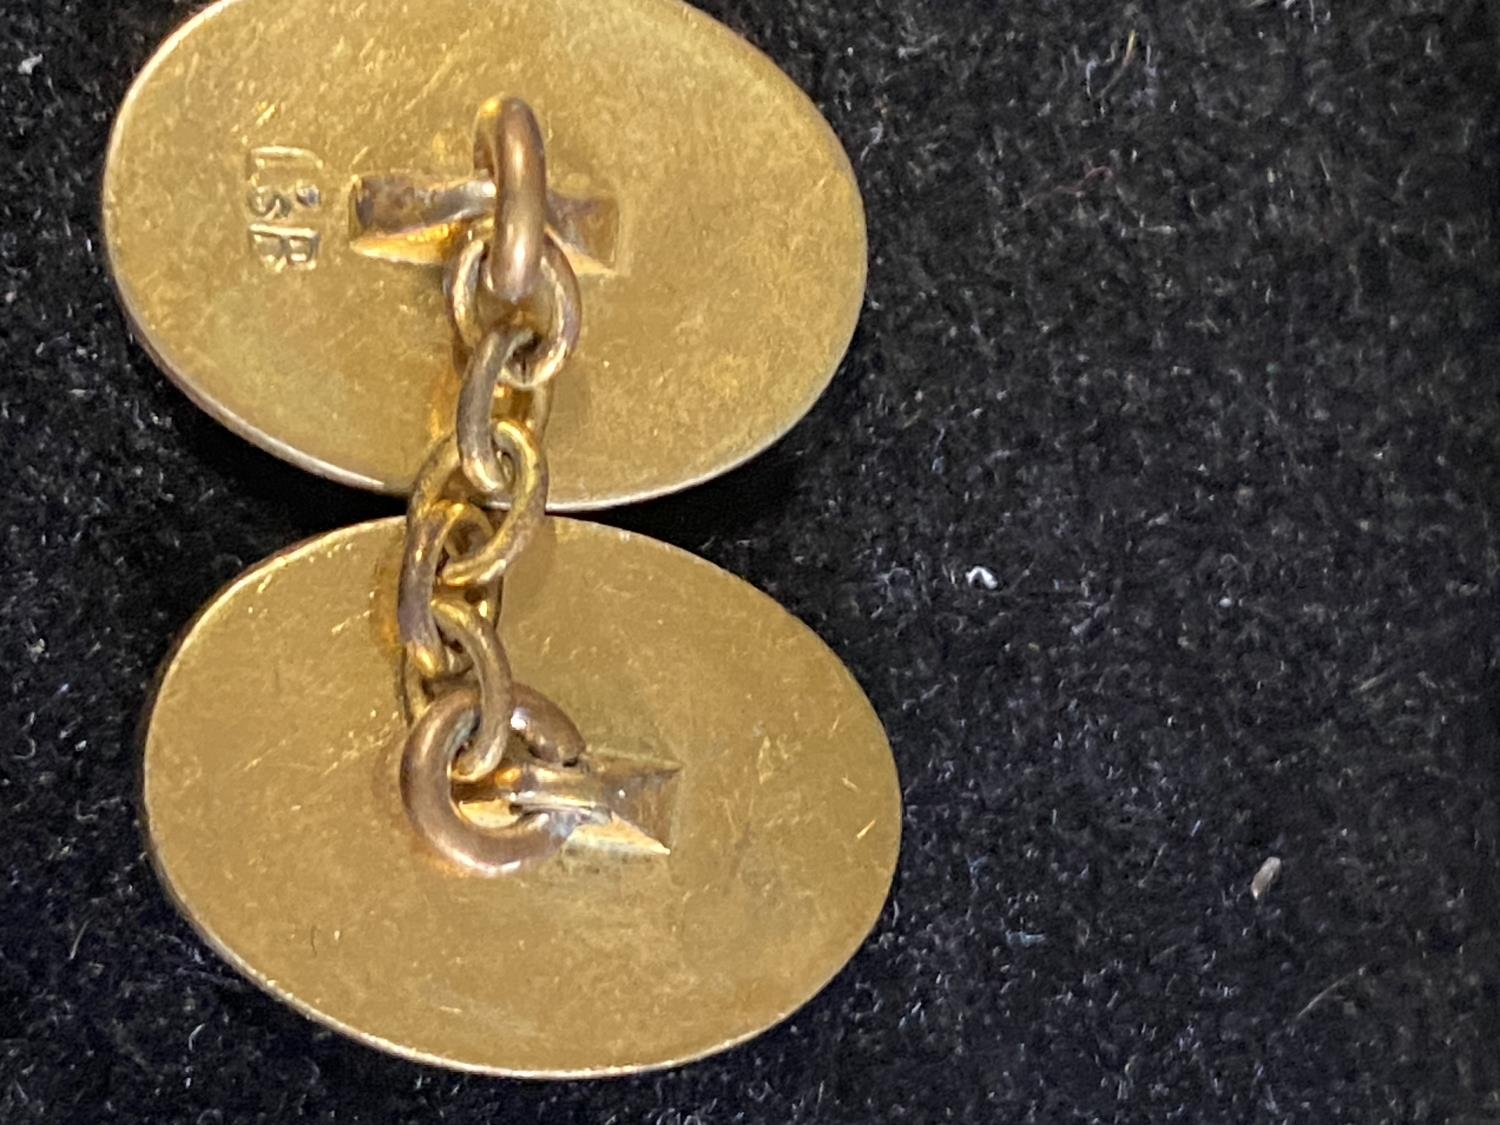 Vintage gold plated cufflinks for Queen's College Cambridge. - Image 2 of 2